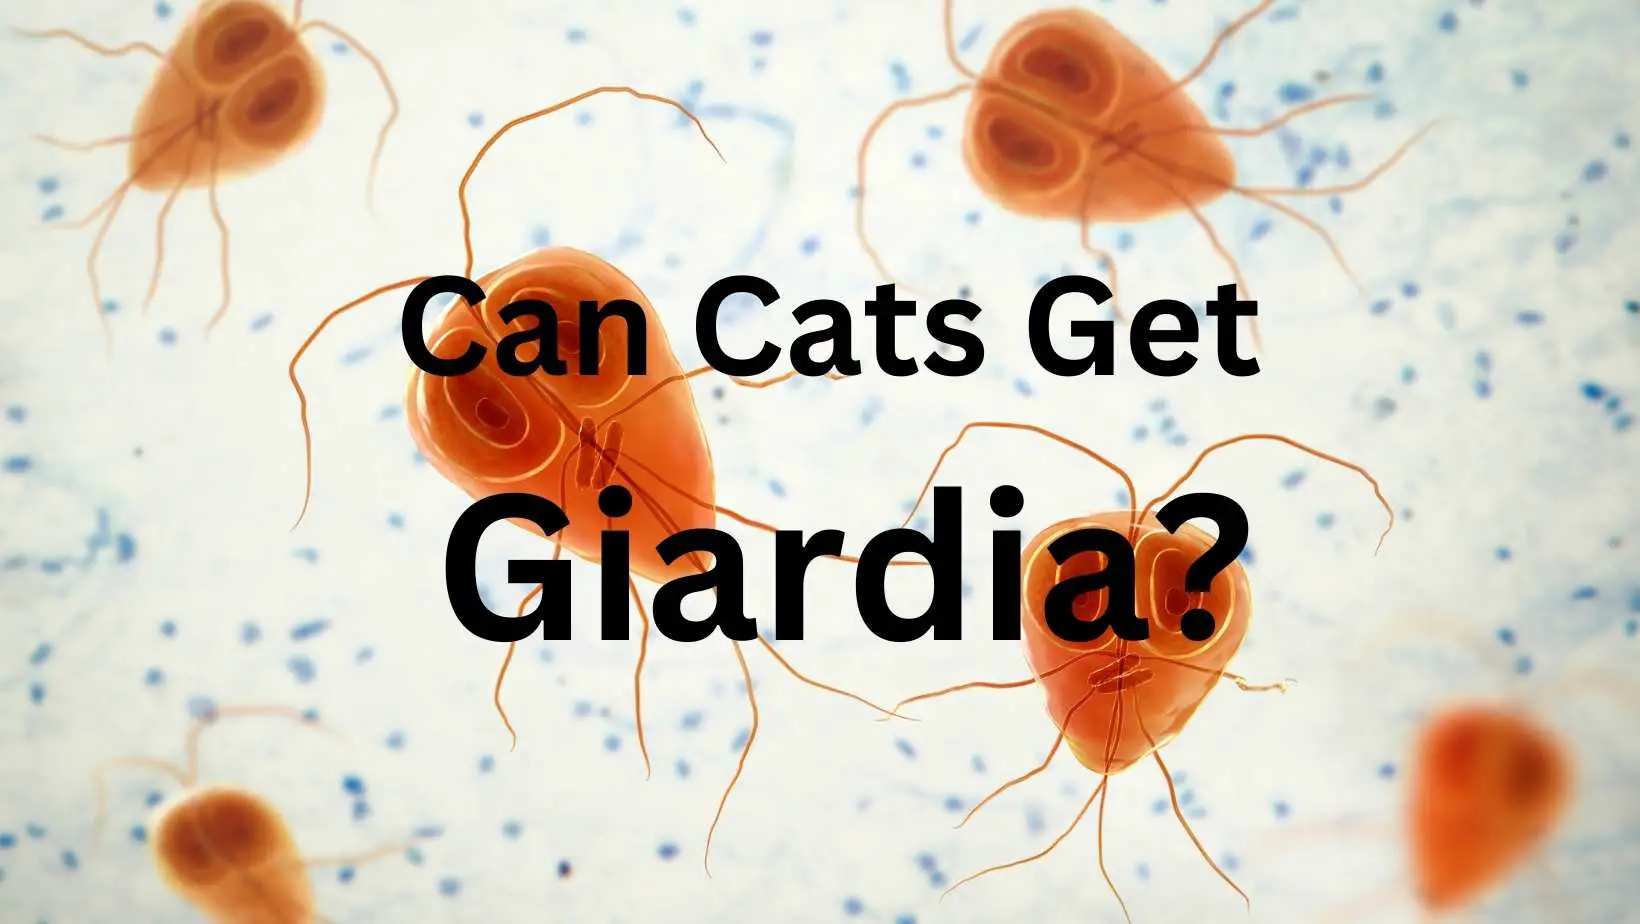 Can Cats Get Giardia?